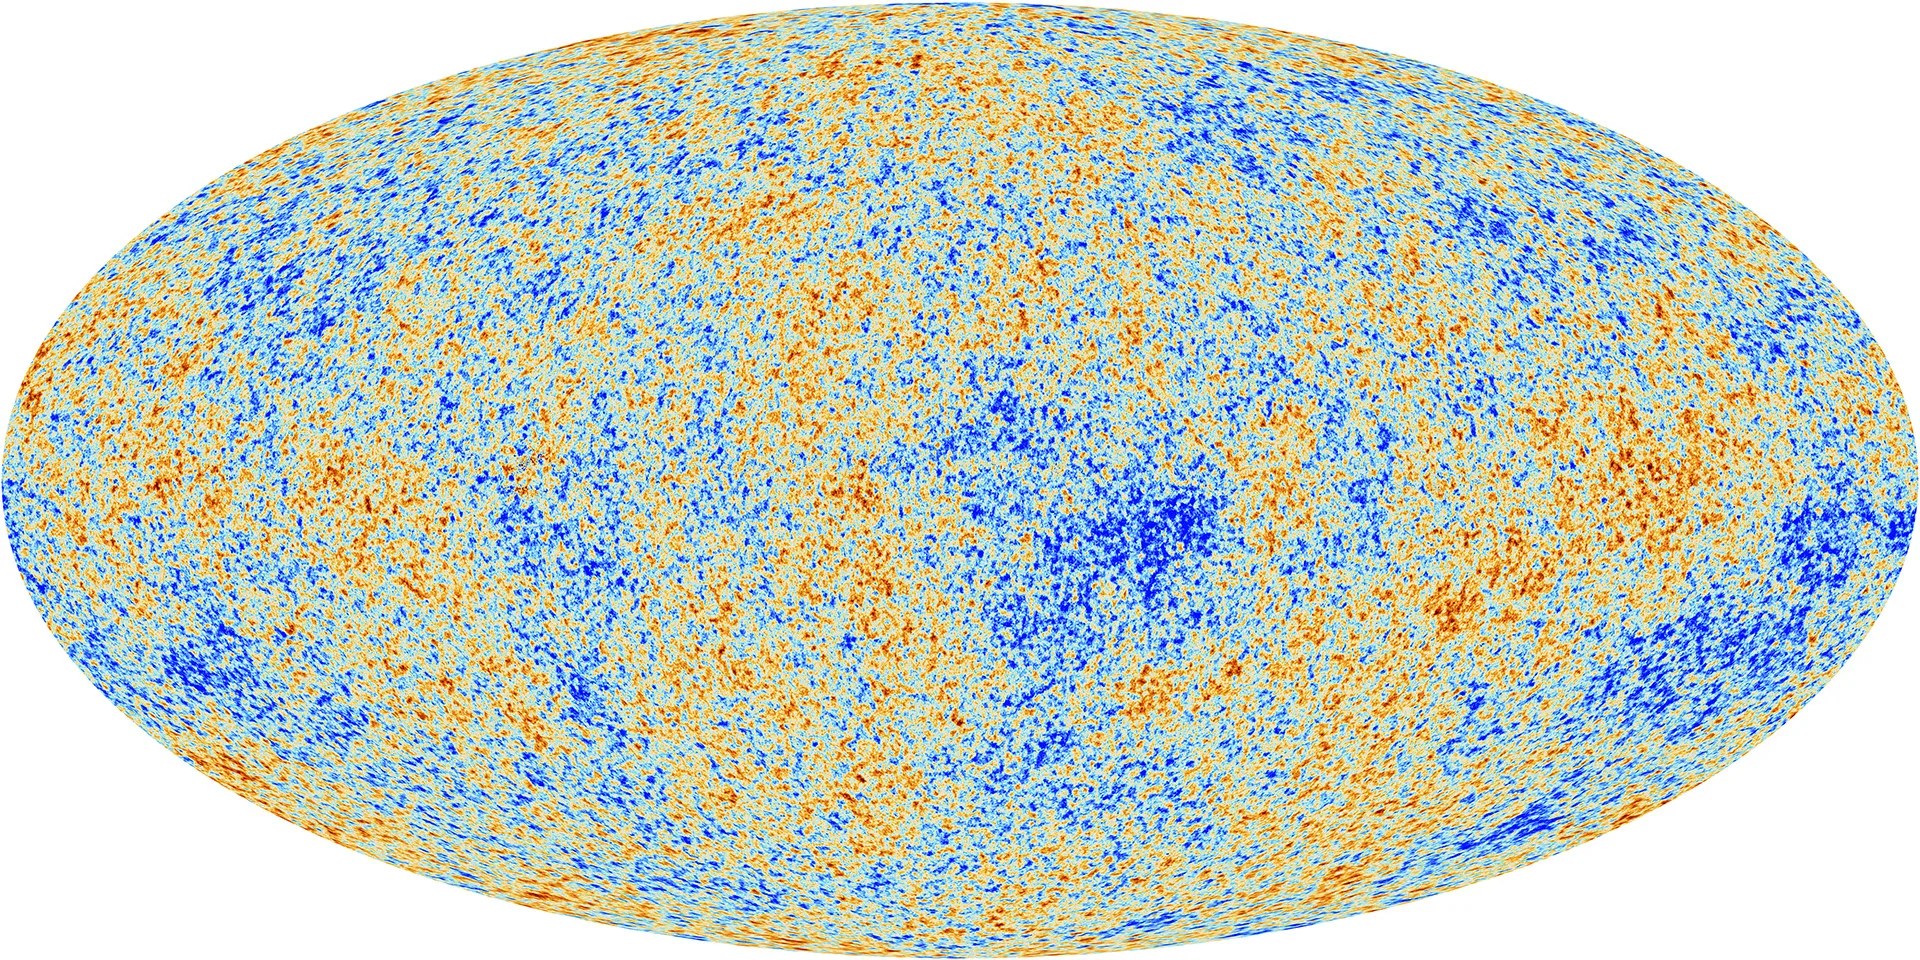 The anisotropies of the Cosmic microwave background (CMB) as observed by Planck Satellite. Credits: ESA and the Planck Collaboration